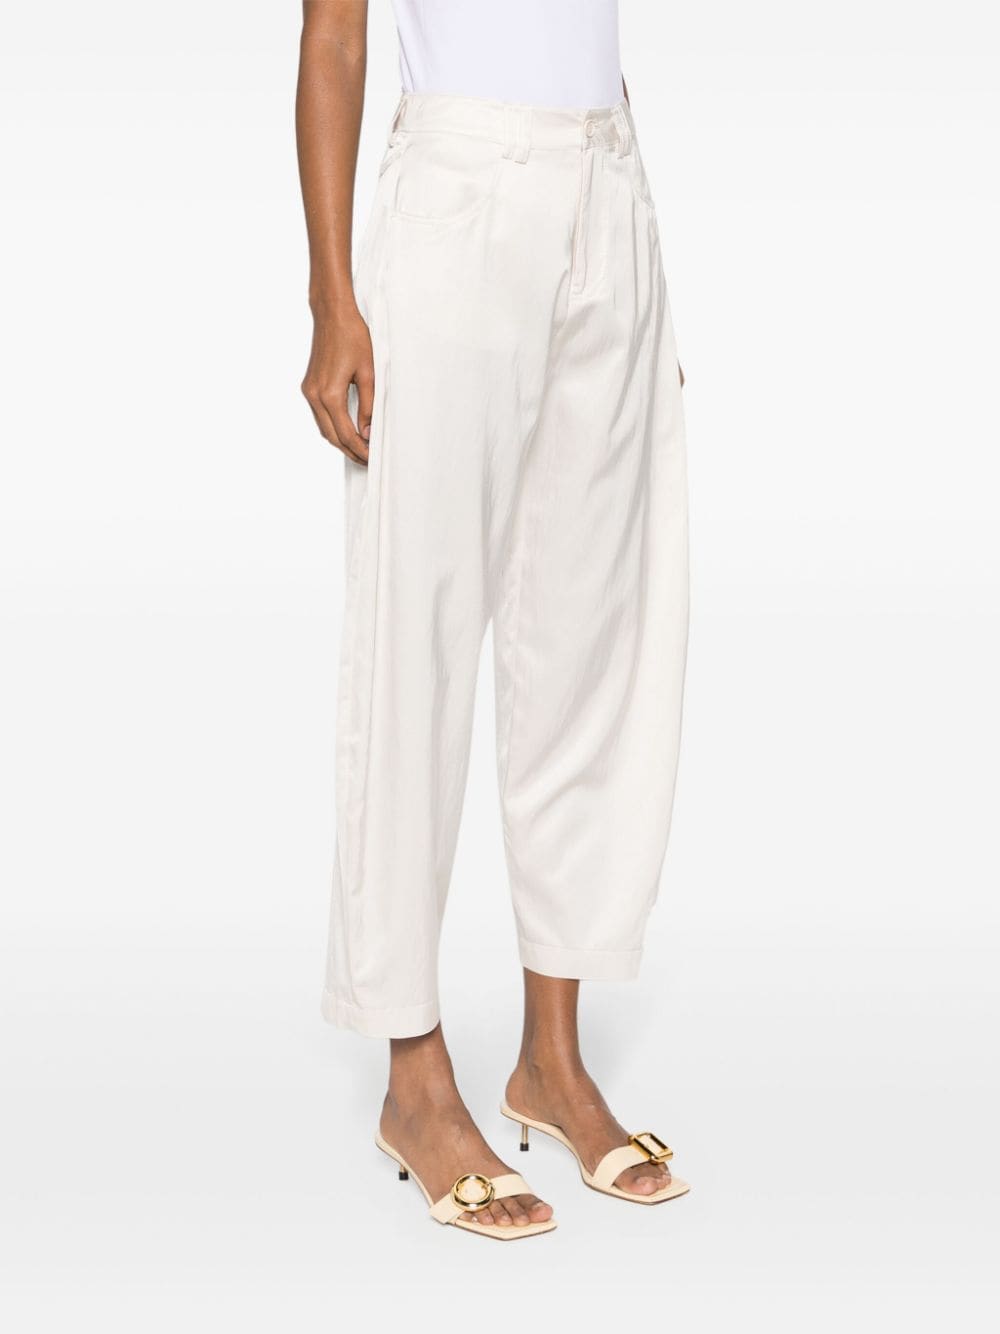 Comfortable cut trousers